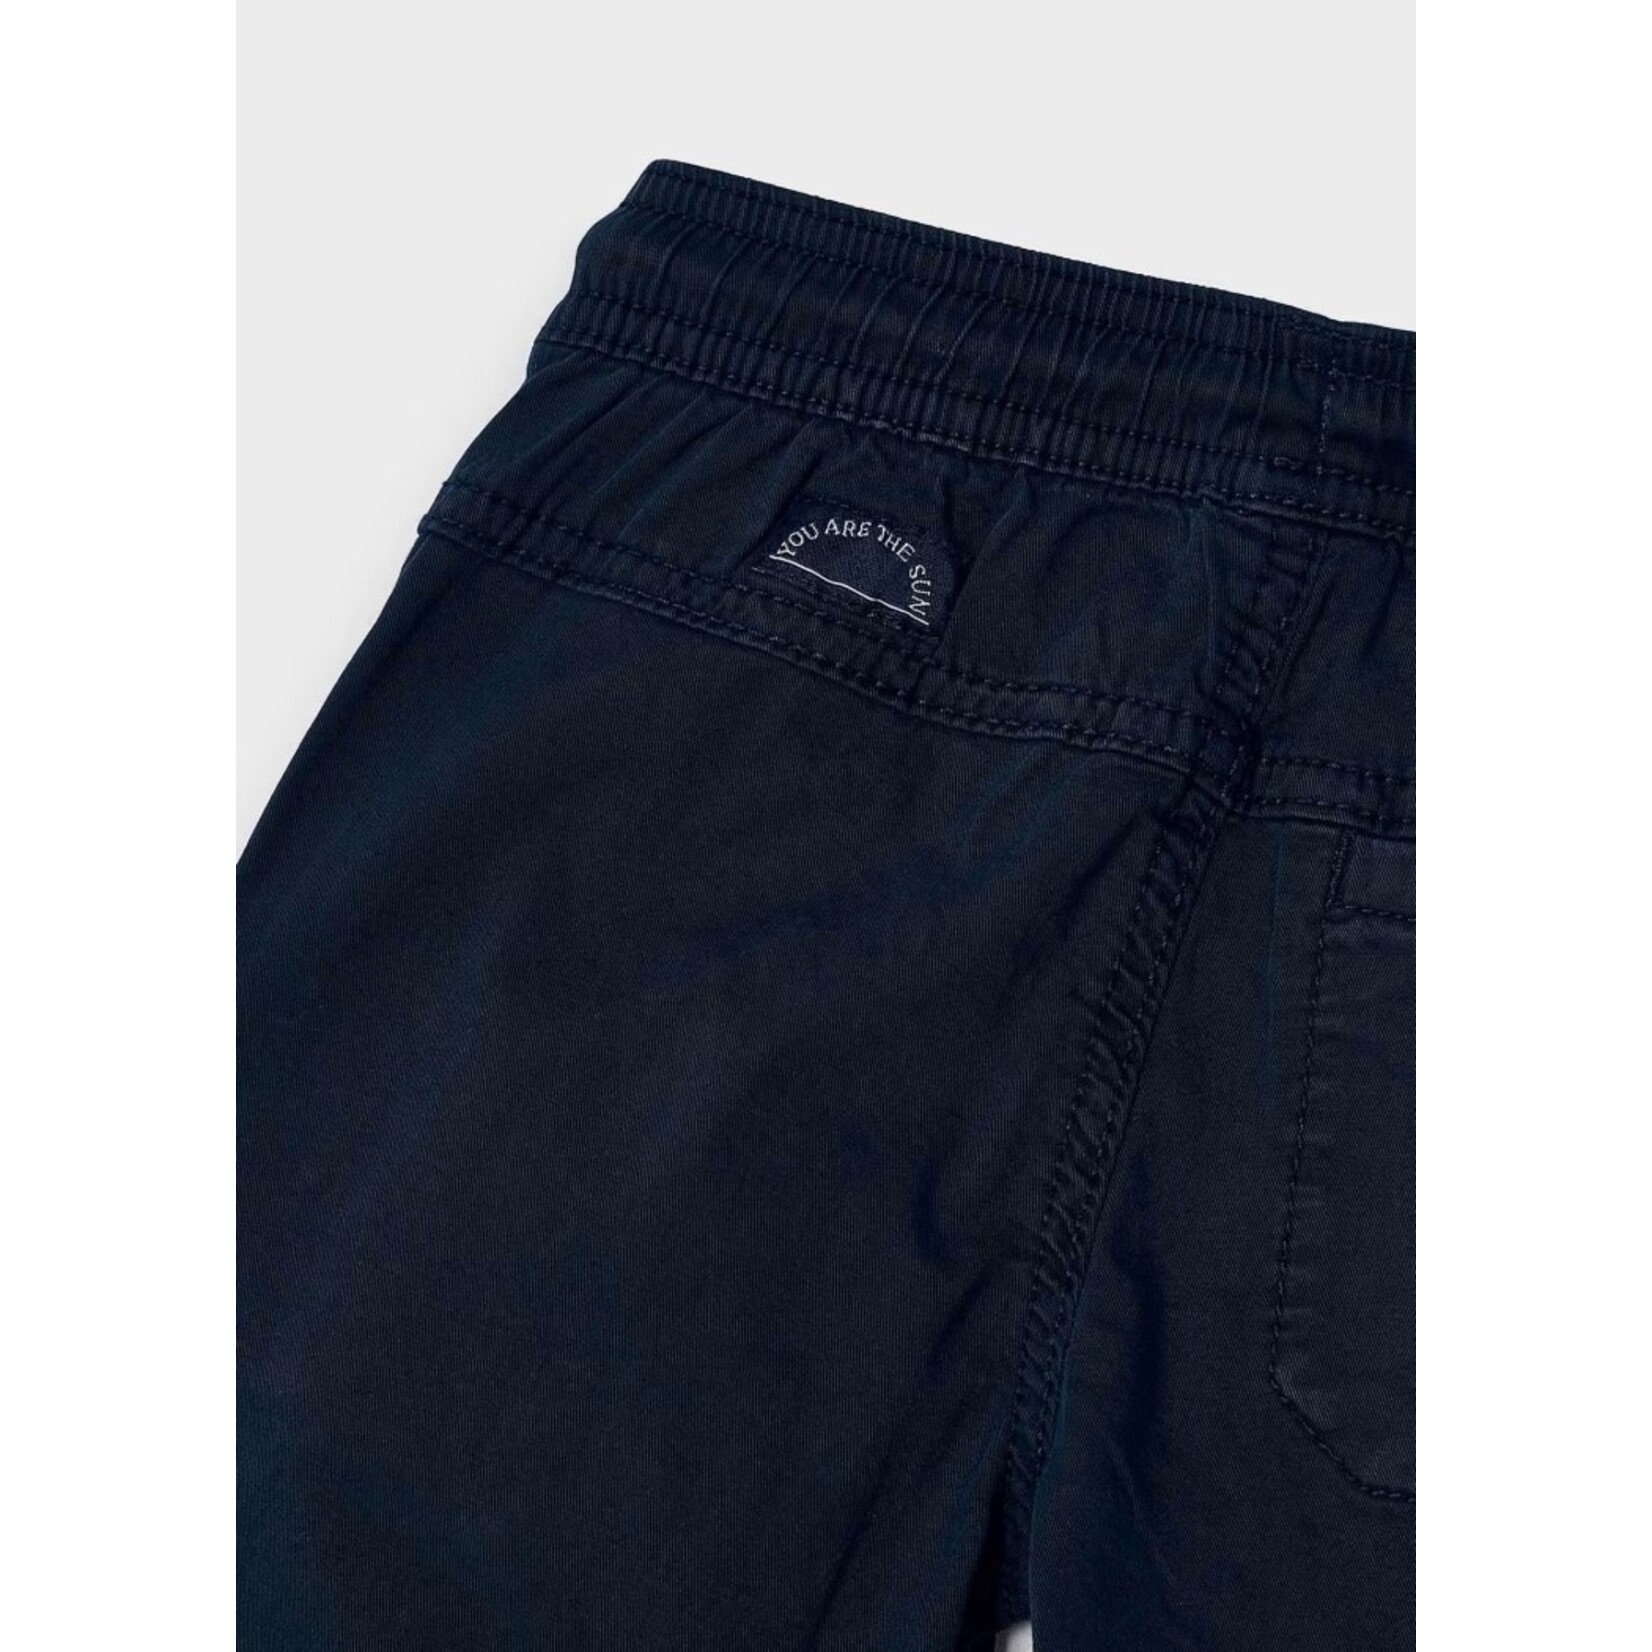 Mayoral MAYORAL - Navy Twill Jogger Pants with Adjustable Drawstring 'Skater Fit'